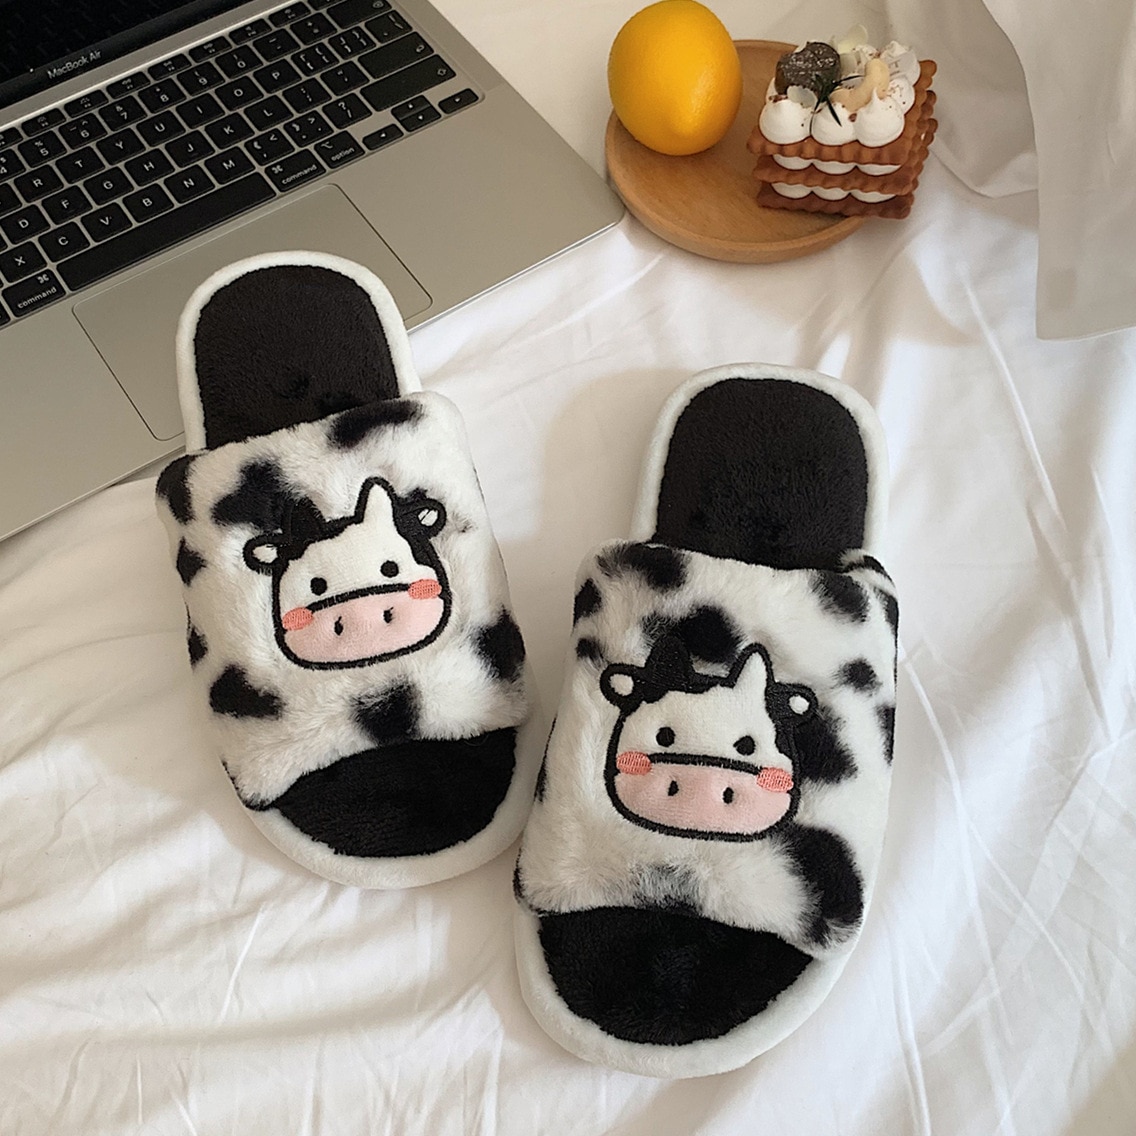 Kawaii Woman Slippers White Open toe Cute Milk Cow Fluffy Slippers Winter Warm Fuzzy Indoor House - The Cow Print